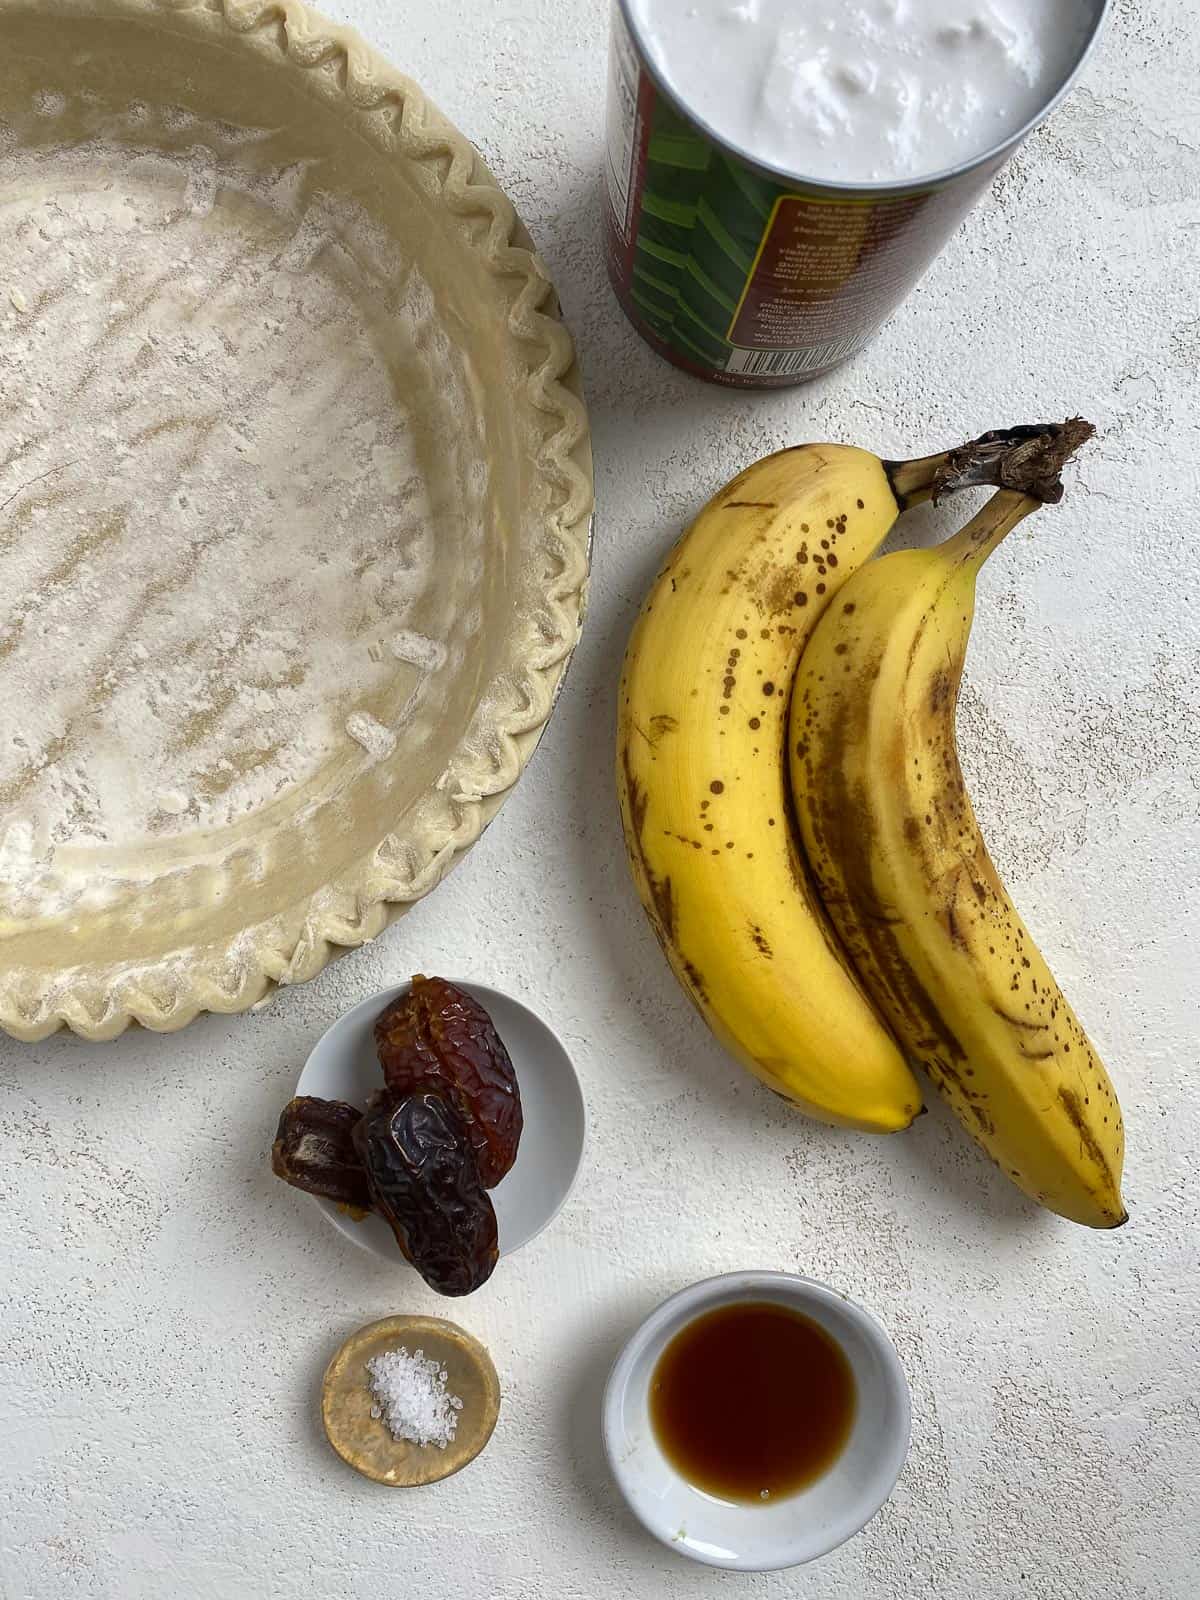 ingredients for Vegan Banana Cream Pie against a white surface